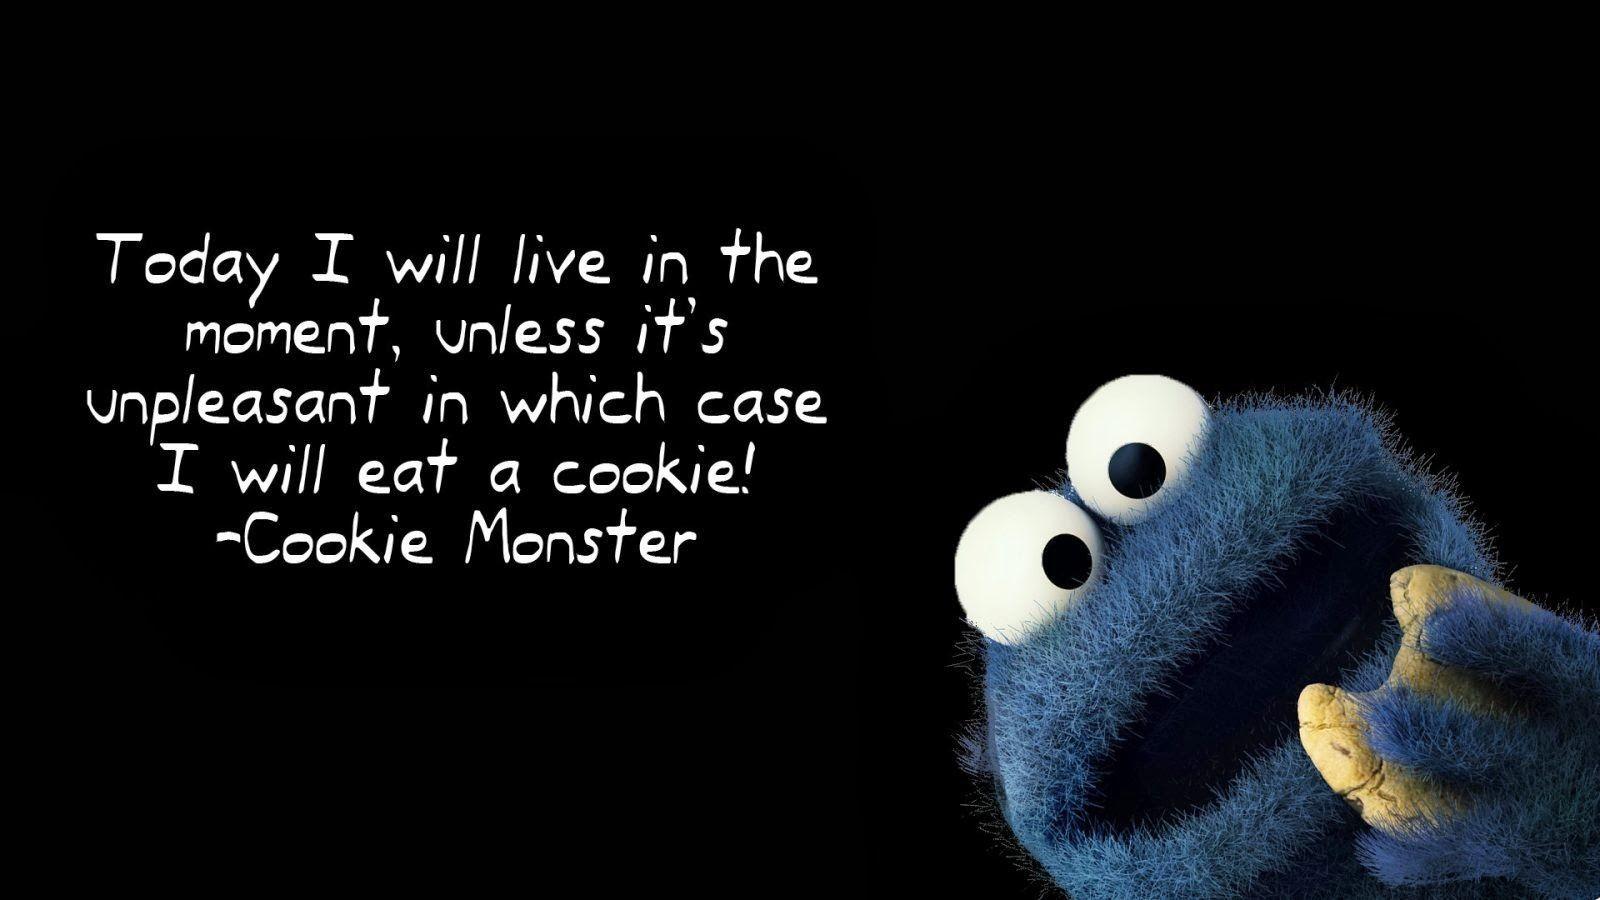 Very Funny Wallpaper For Desktop. Funny quotes wallpaper, Cookie monster quotes, Monster quotes